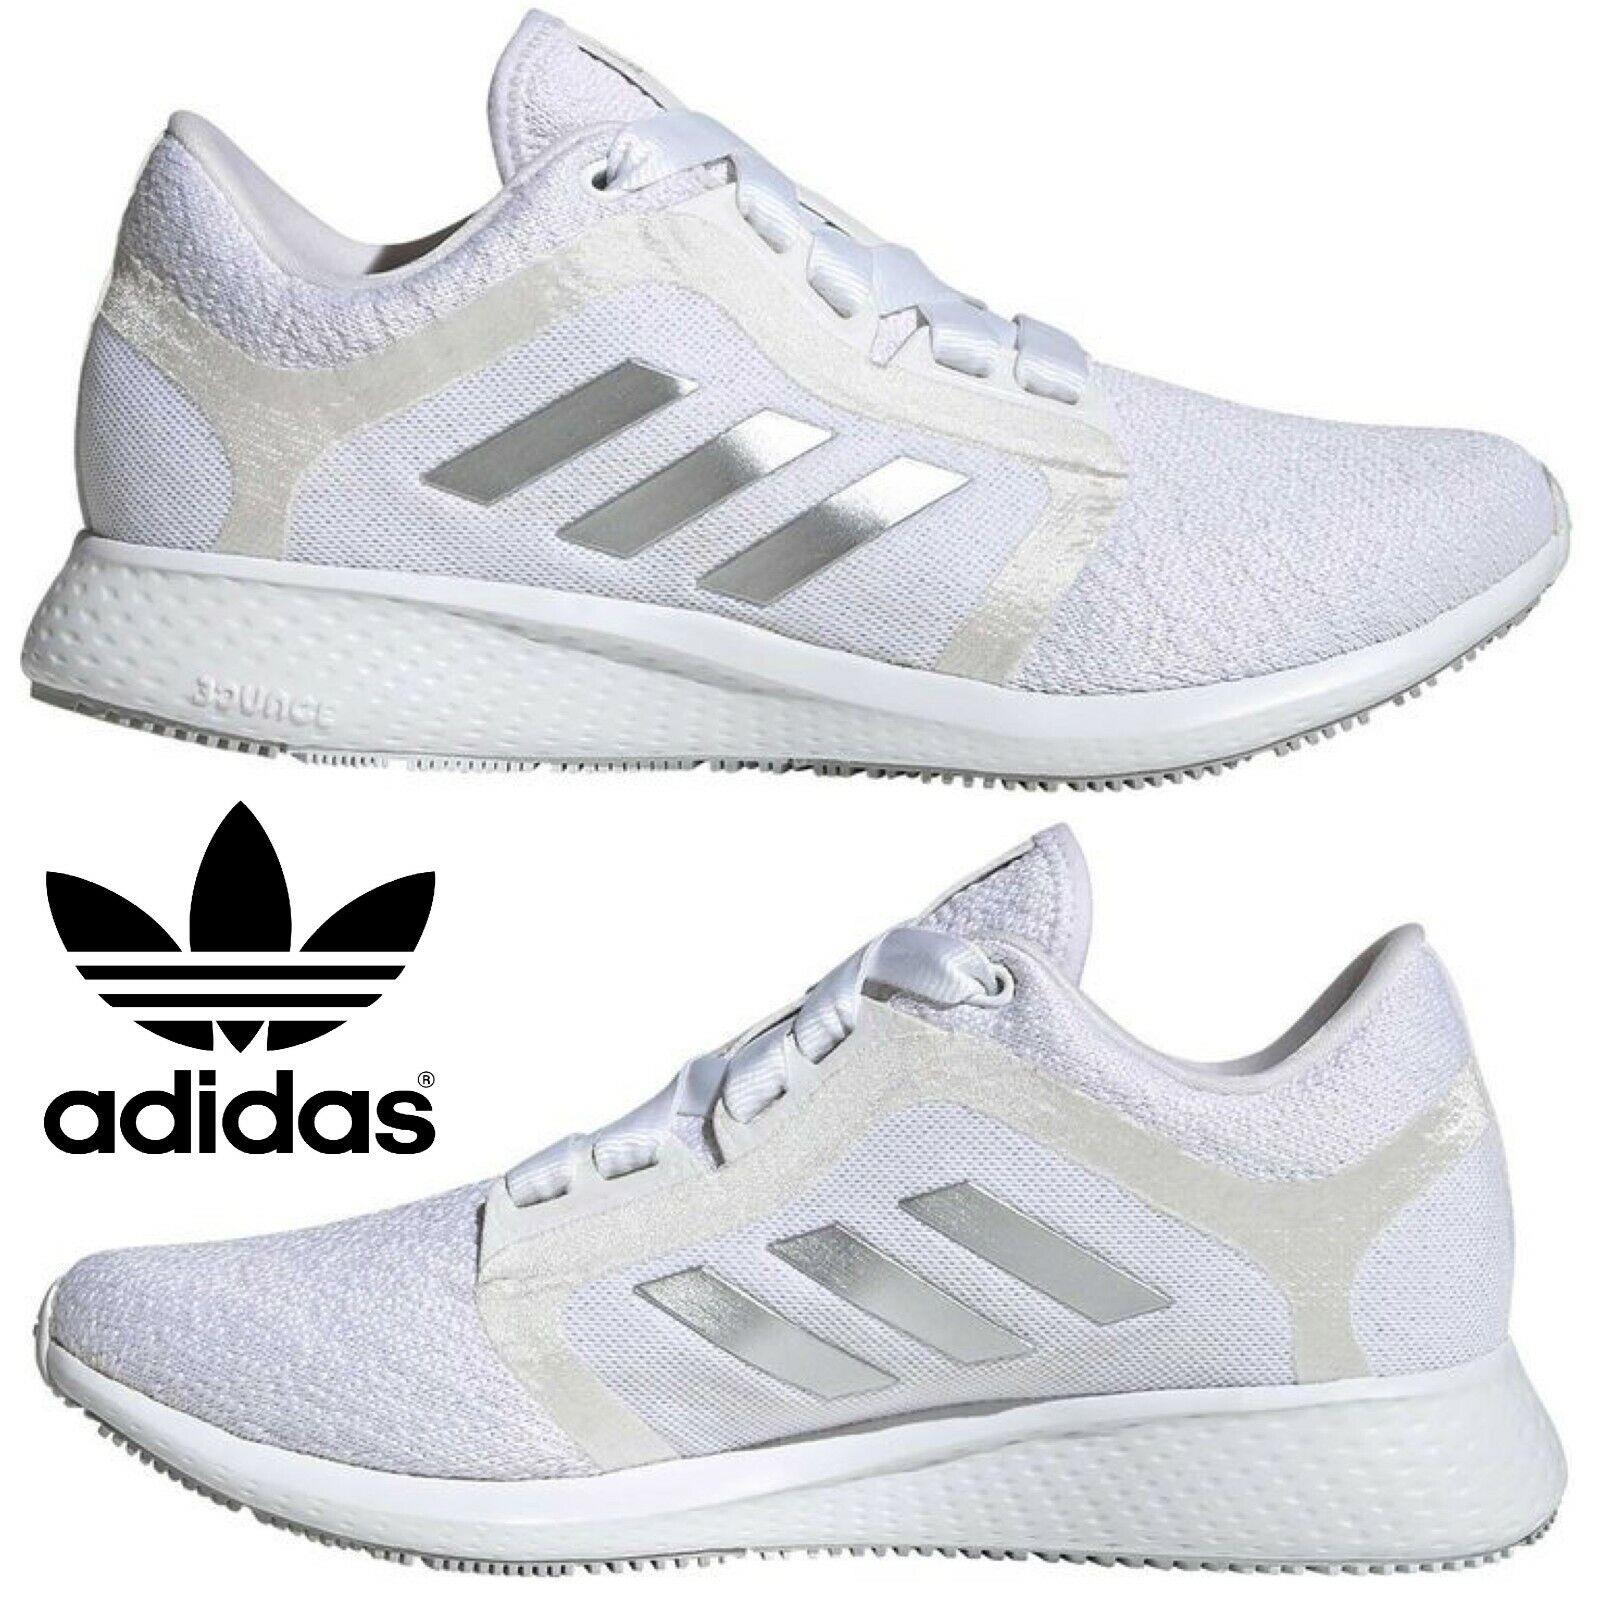 Adidas Edge Lux 4 Women`s Sneakers Sport Running Gym Comfort Athletic Shoes